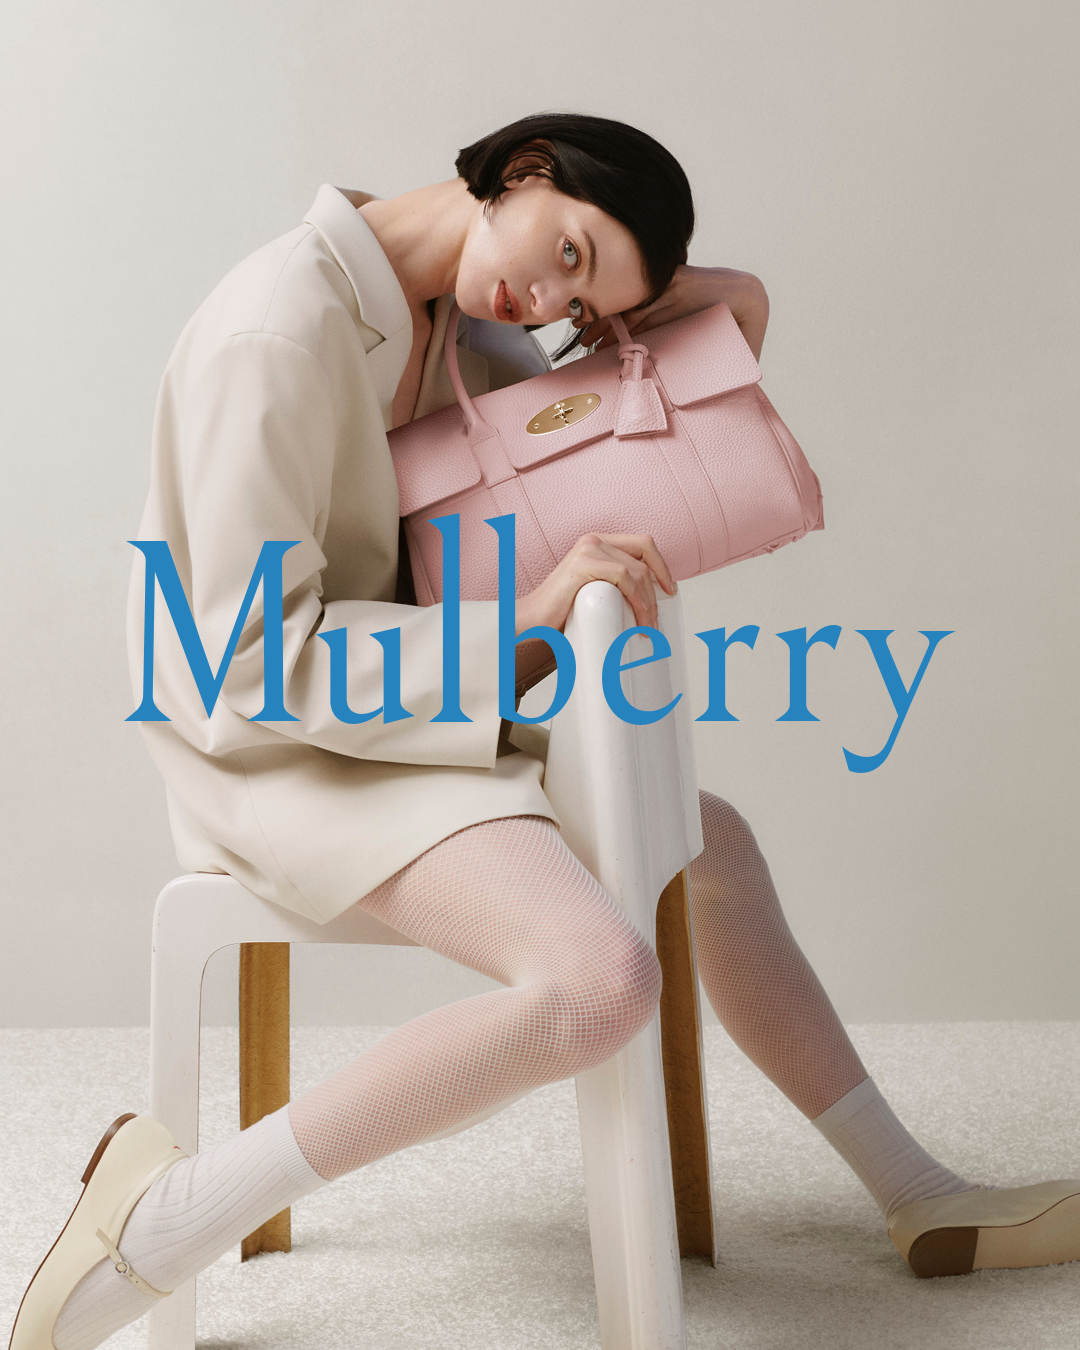 Mulberry, John Lewis in 2023